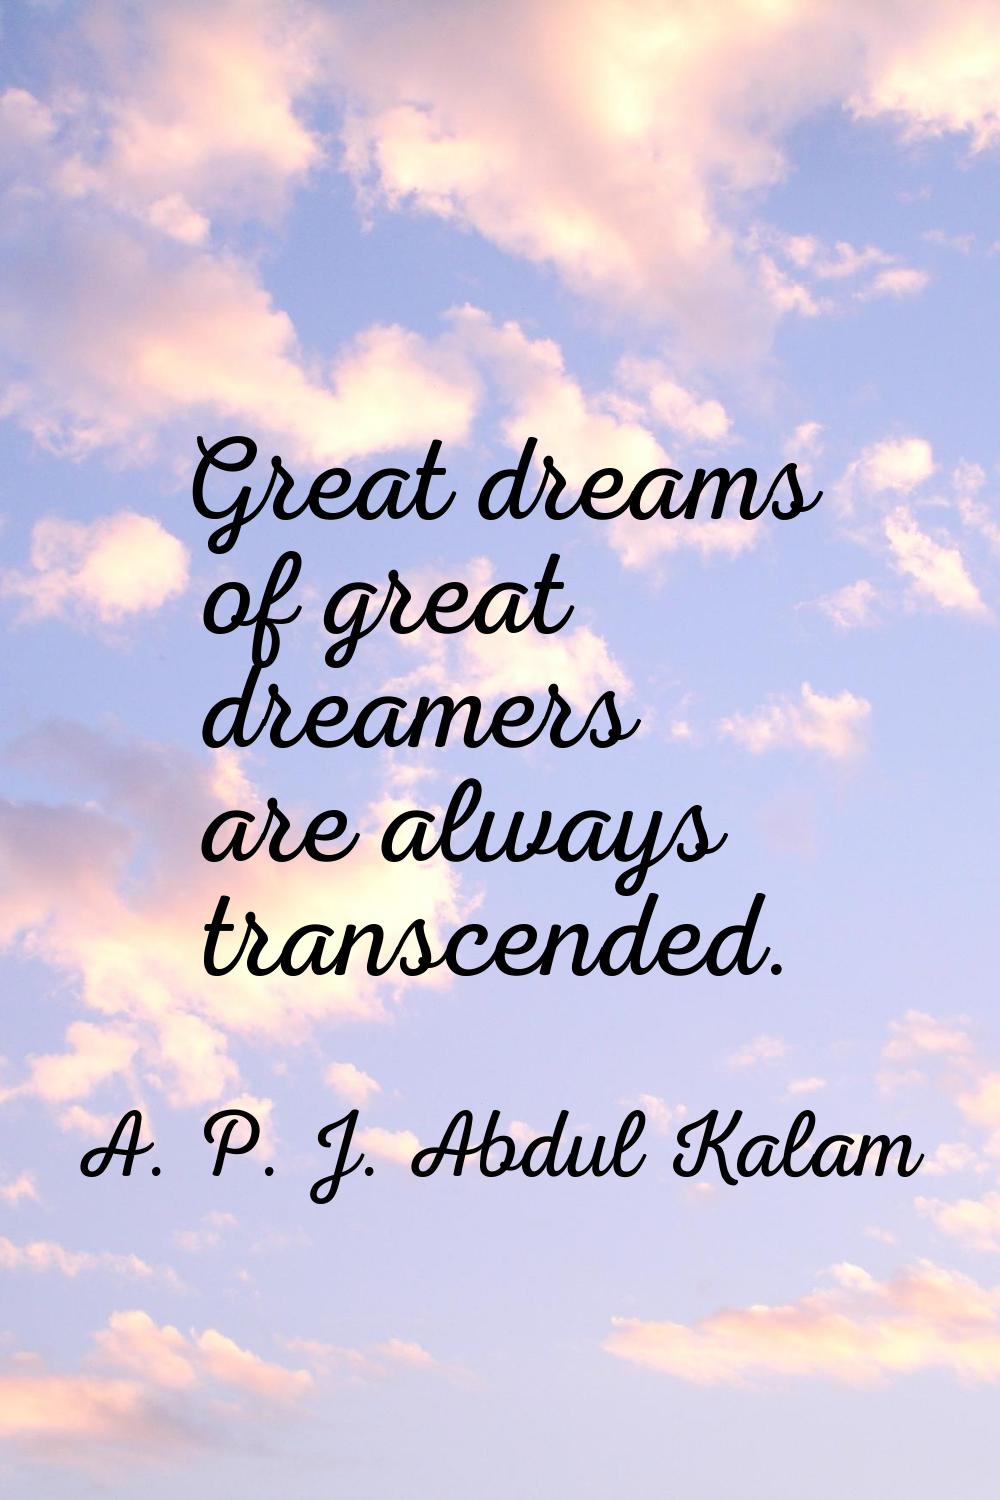 Great dreams of great dreamers are always transcended.